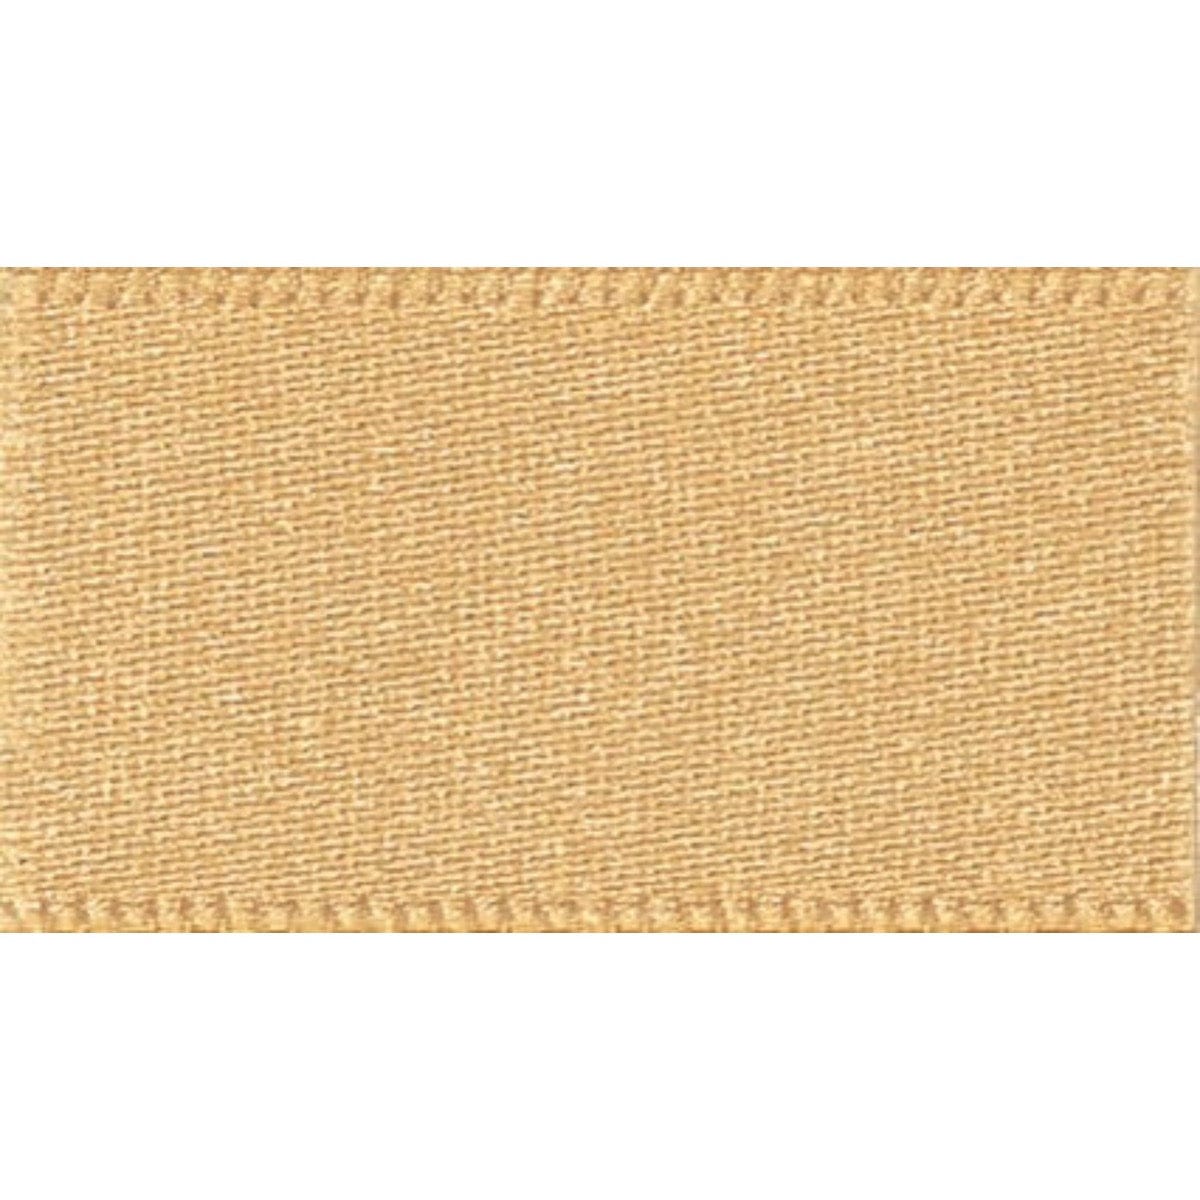 Double Faced Satin Ribbon Honey Gold: 7mm wide. Price per metre.